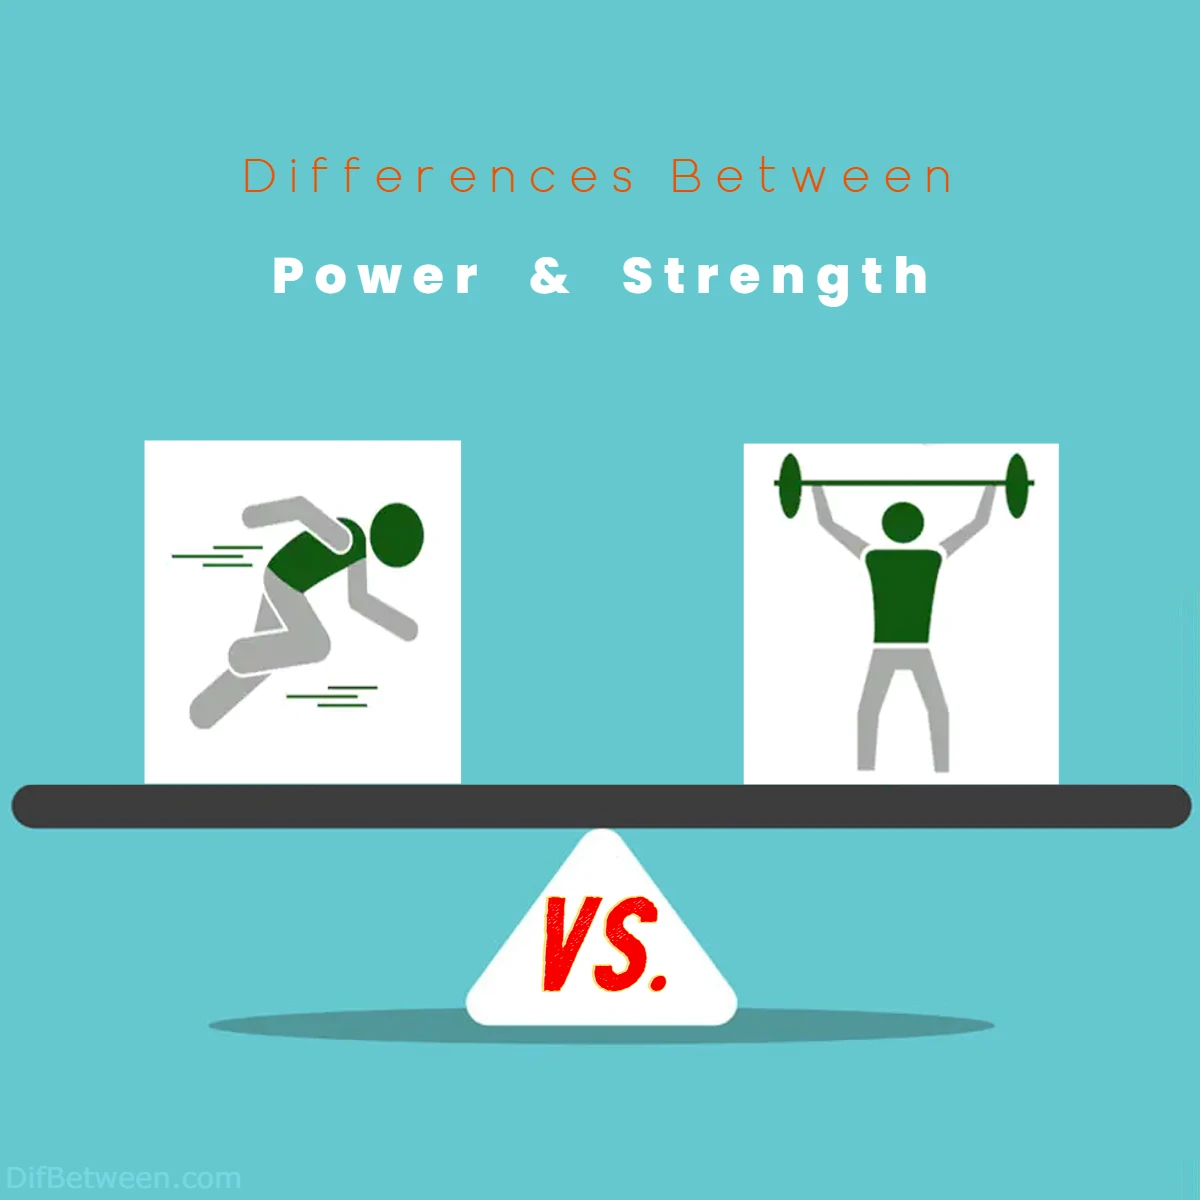 Differences Between Power vs Strength